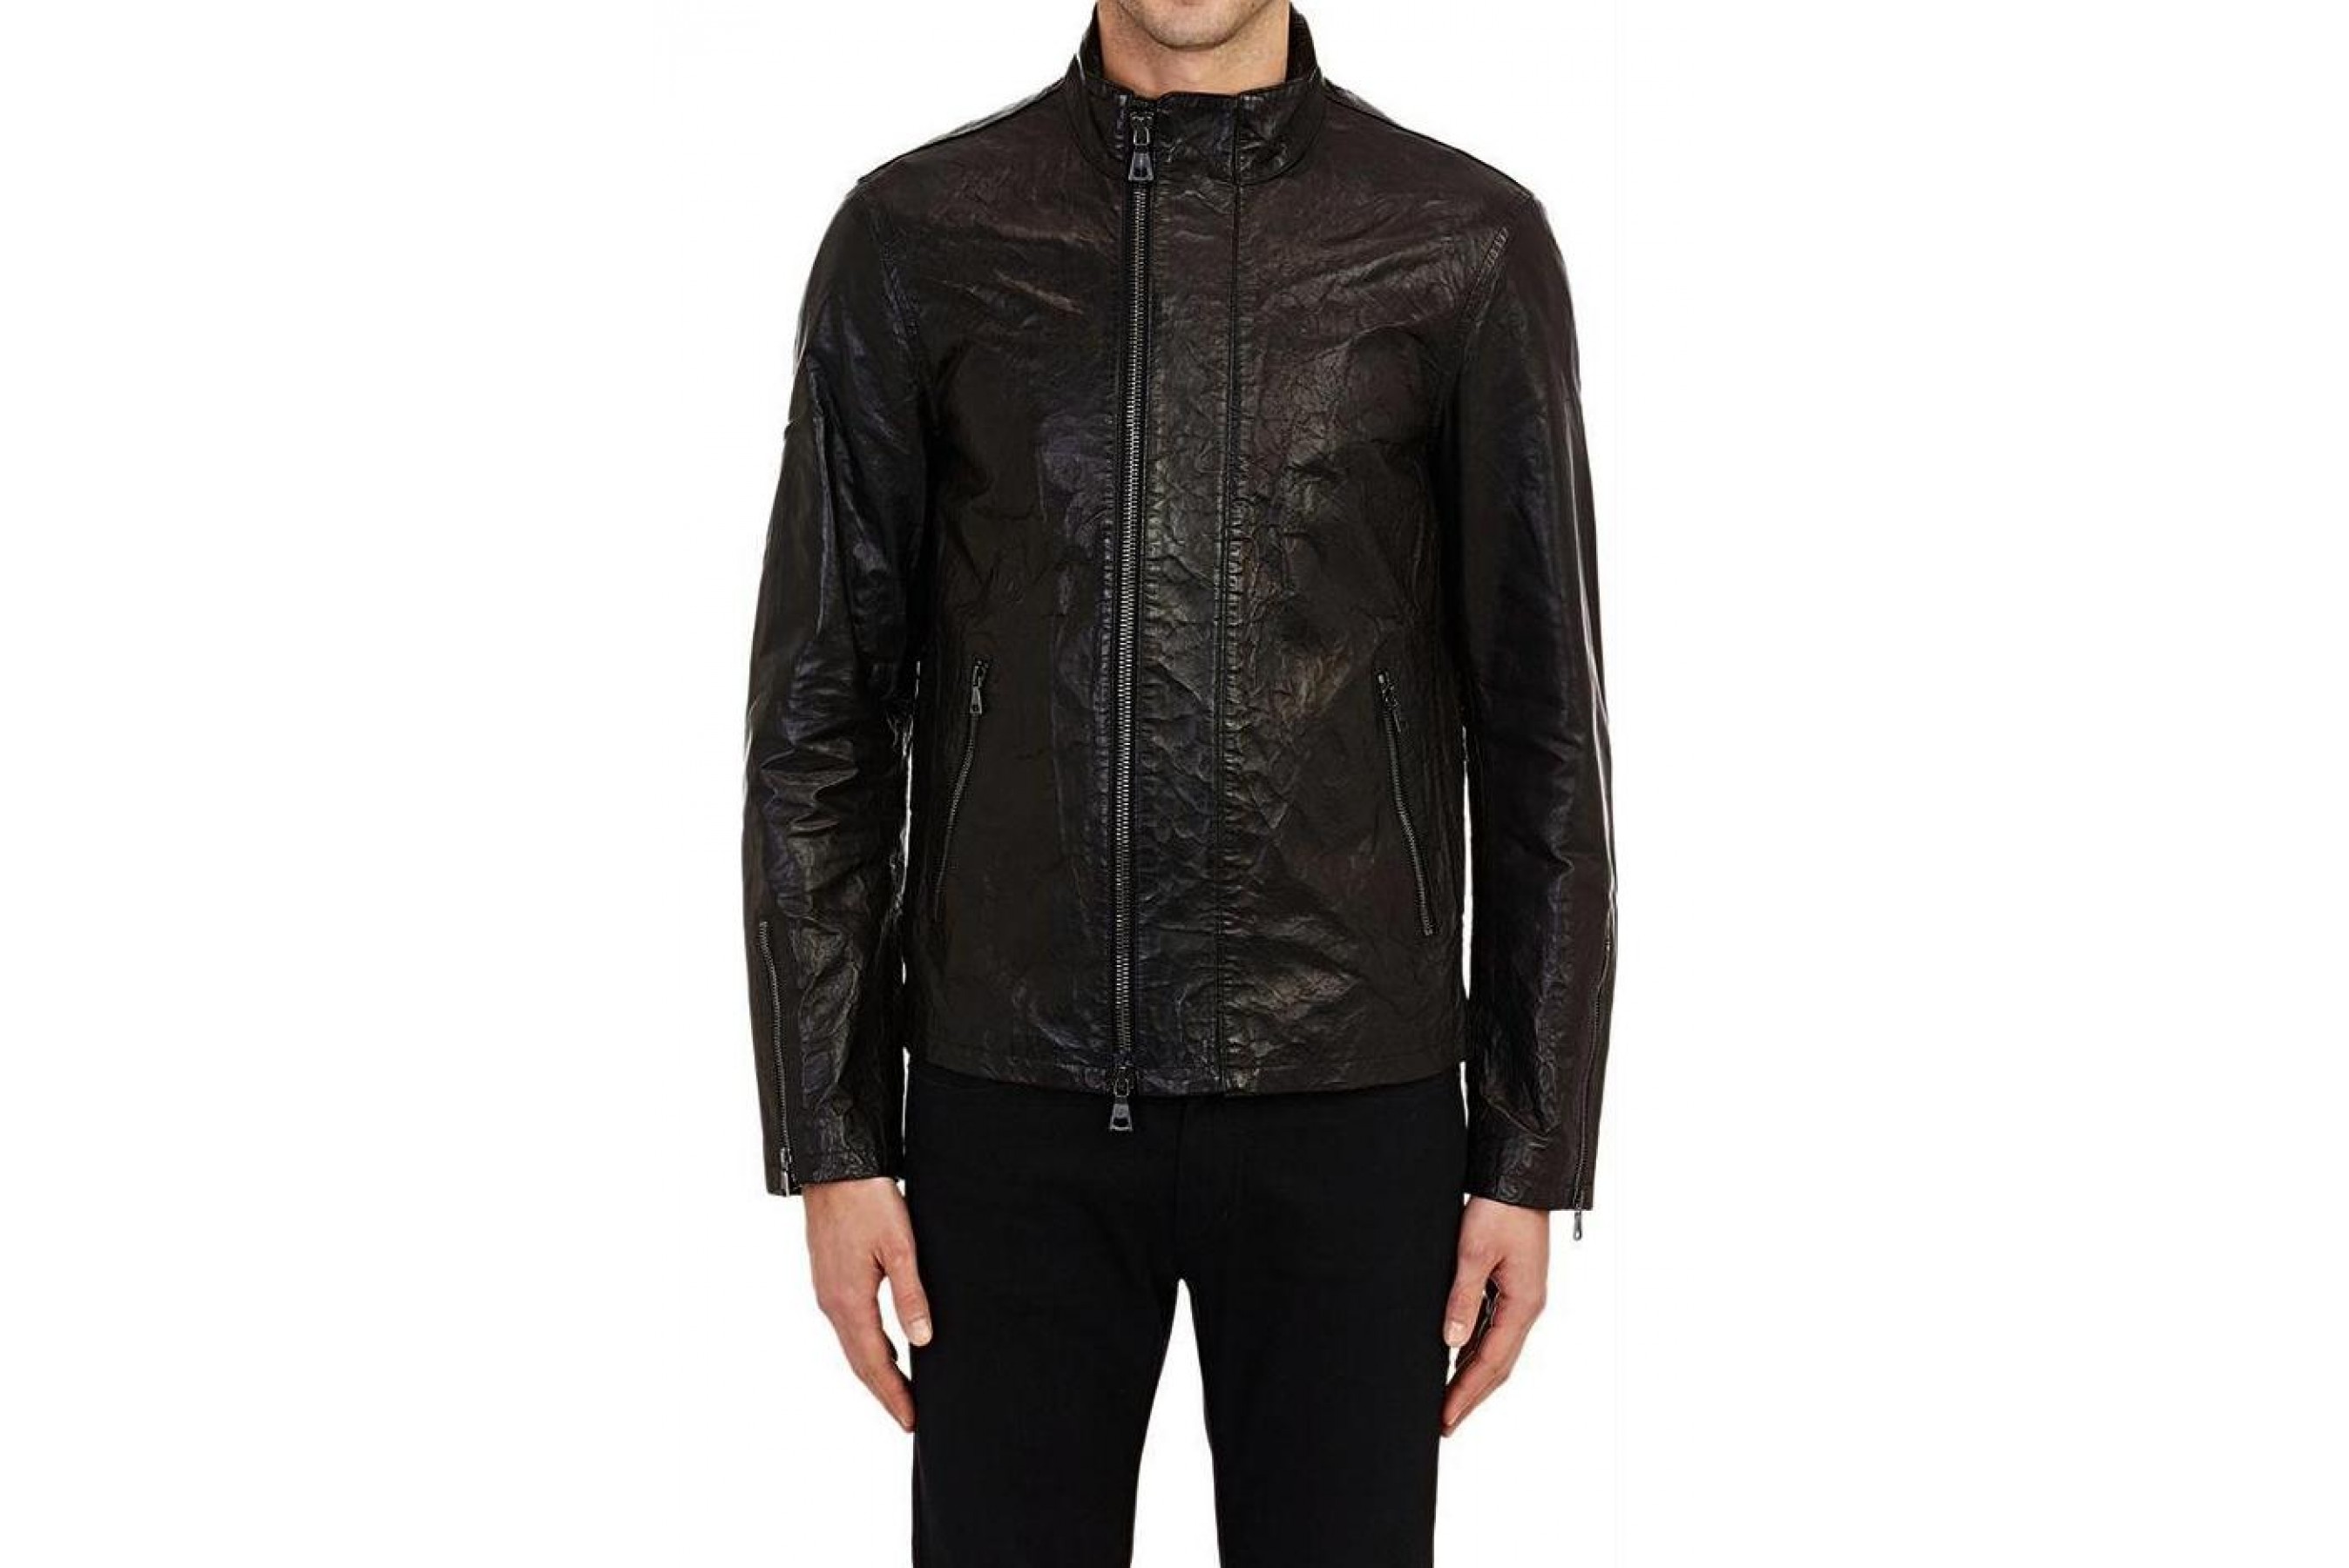 Tom Cruise Mission Impossible 5 Leather Jacket | Ethan Hunt Outfit